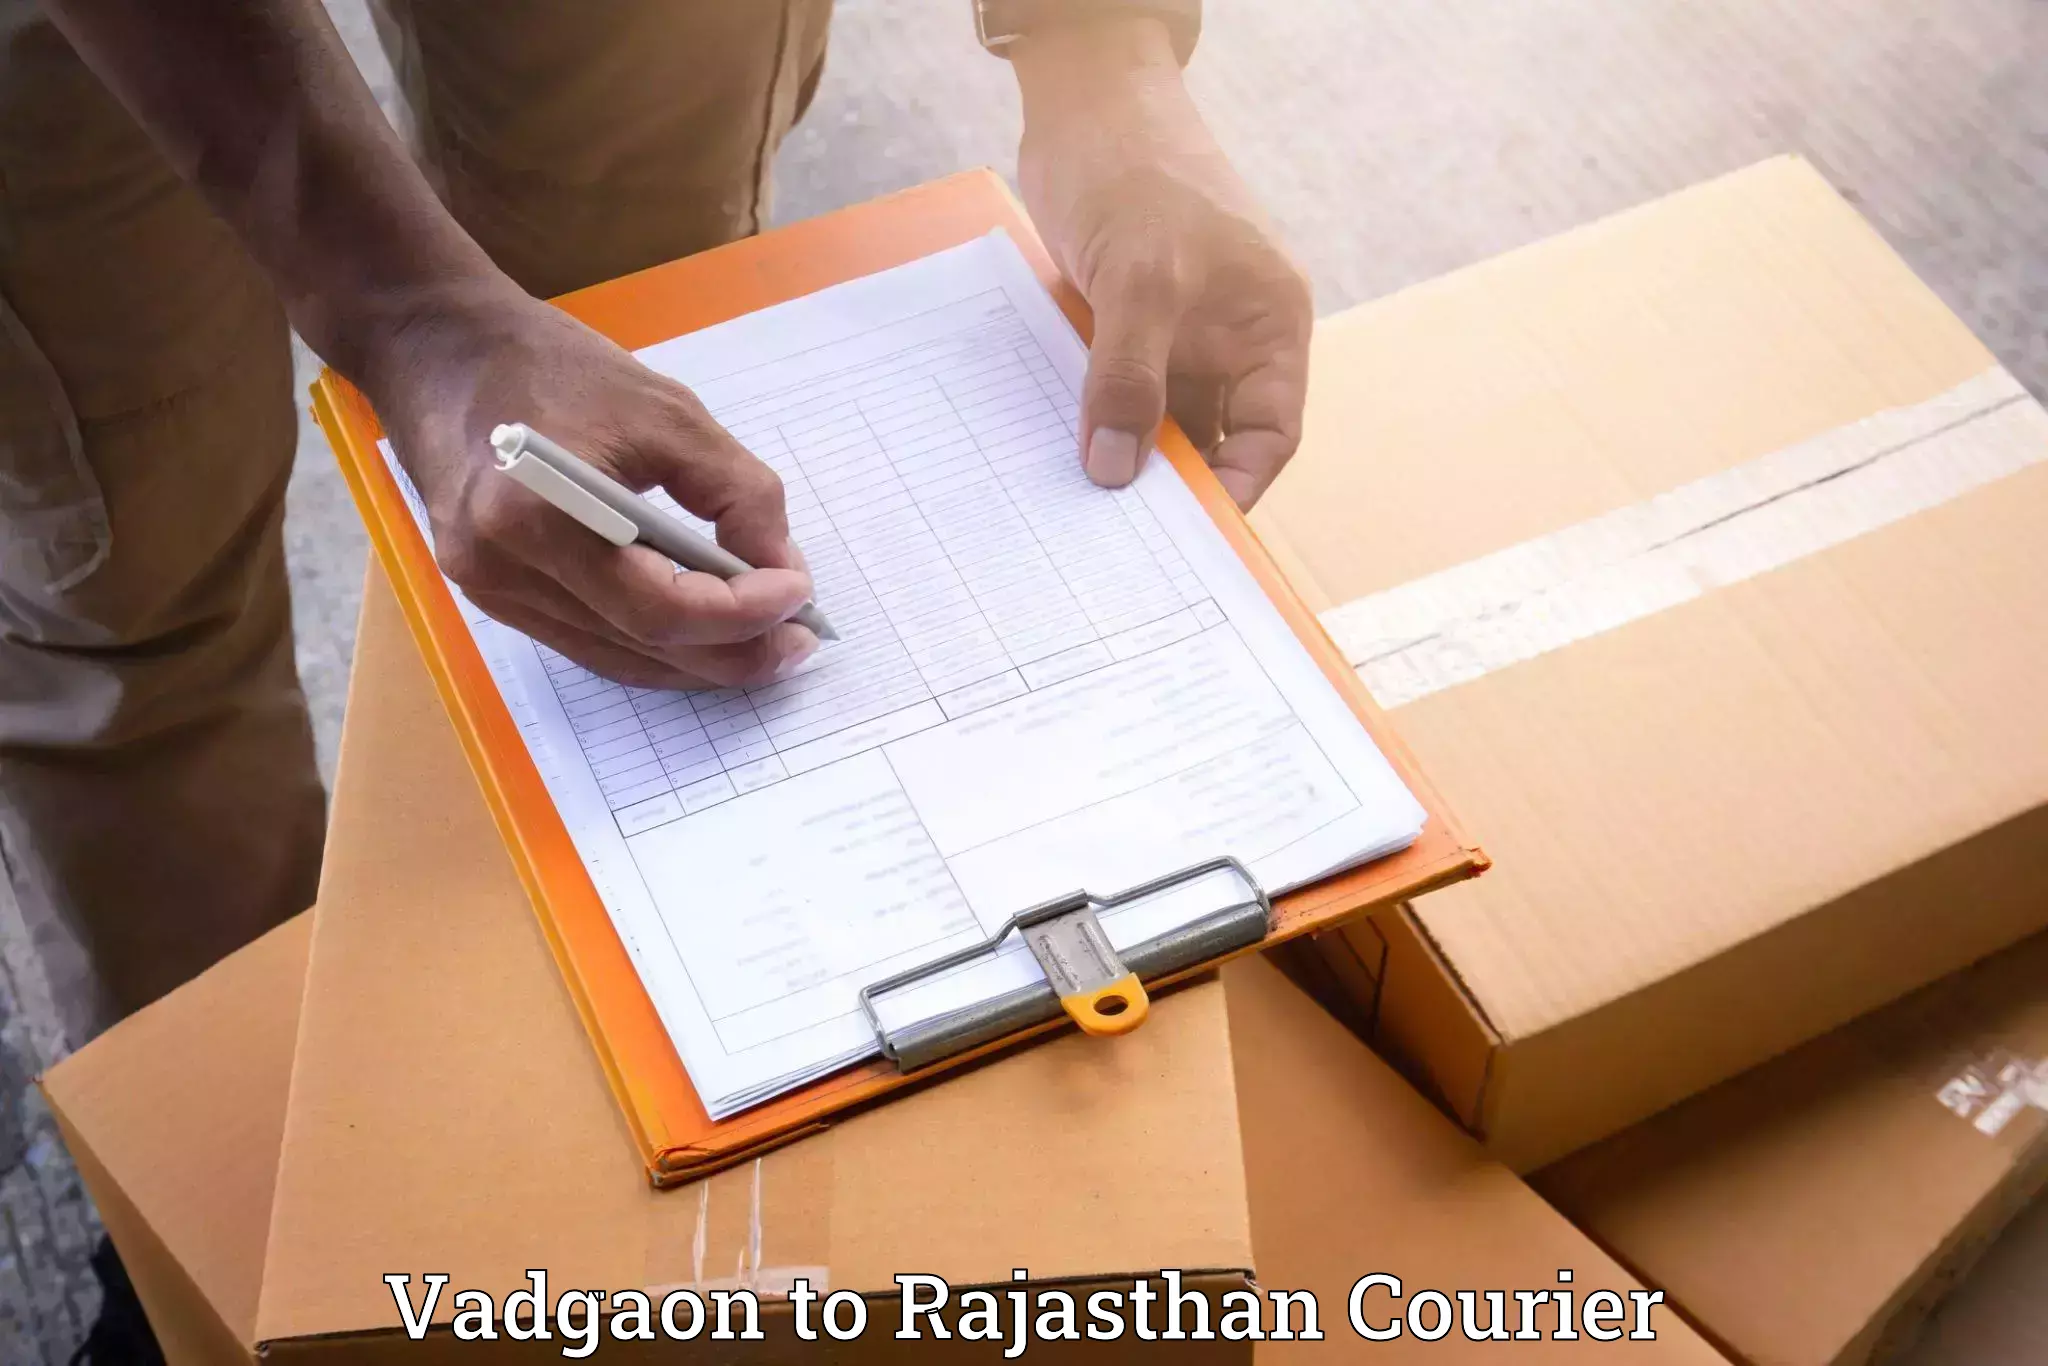 Professional movers and packers Vadgaon to Rajgarh Rajasthan